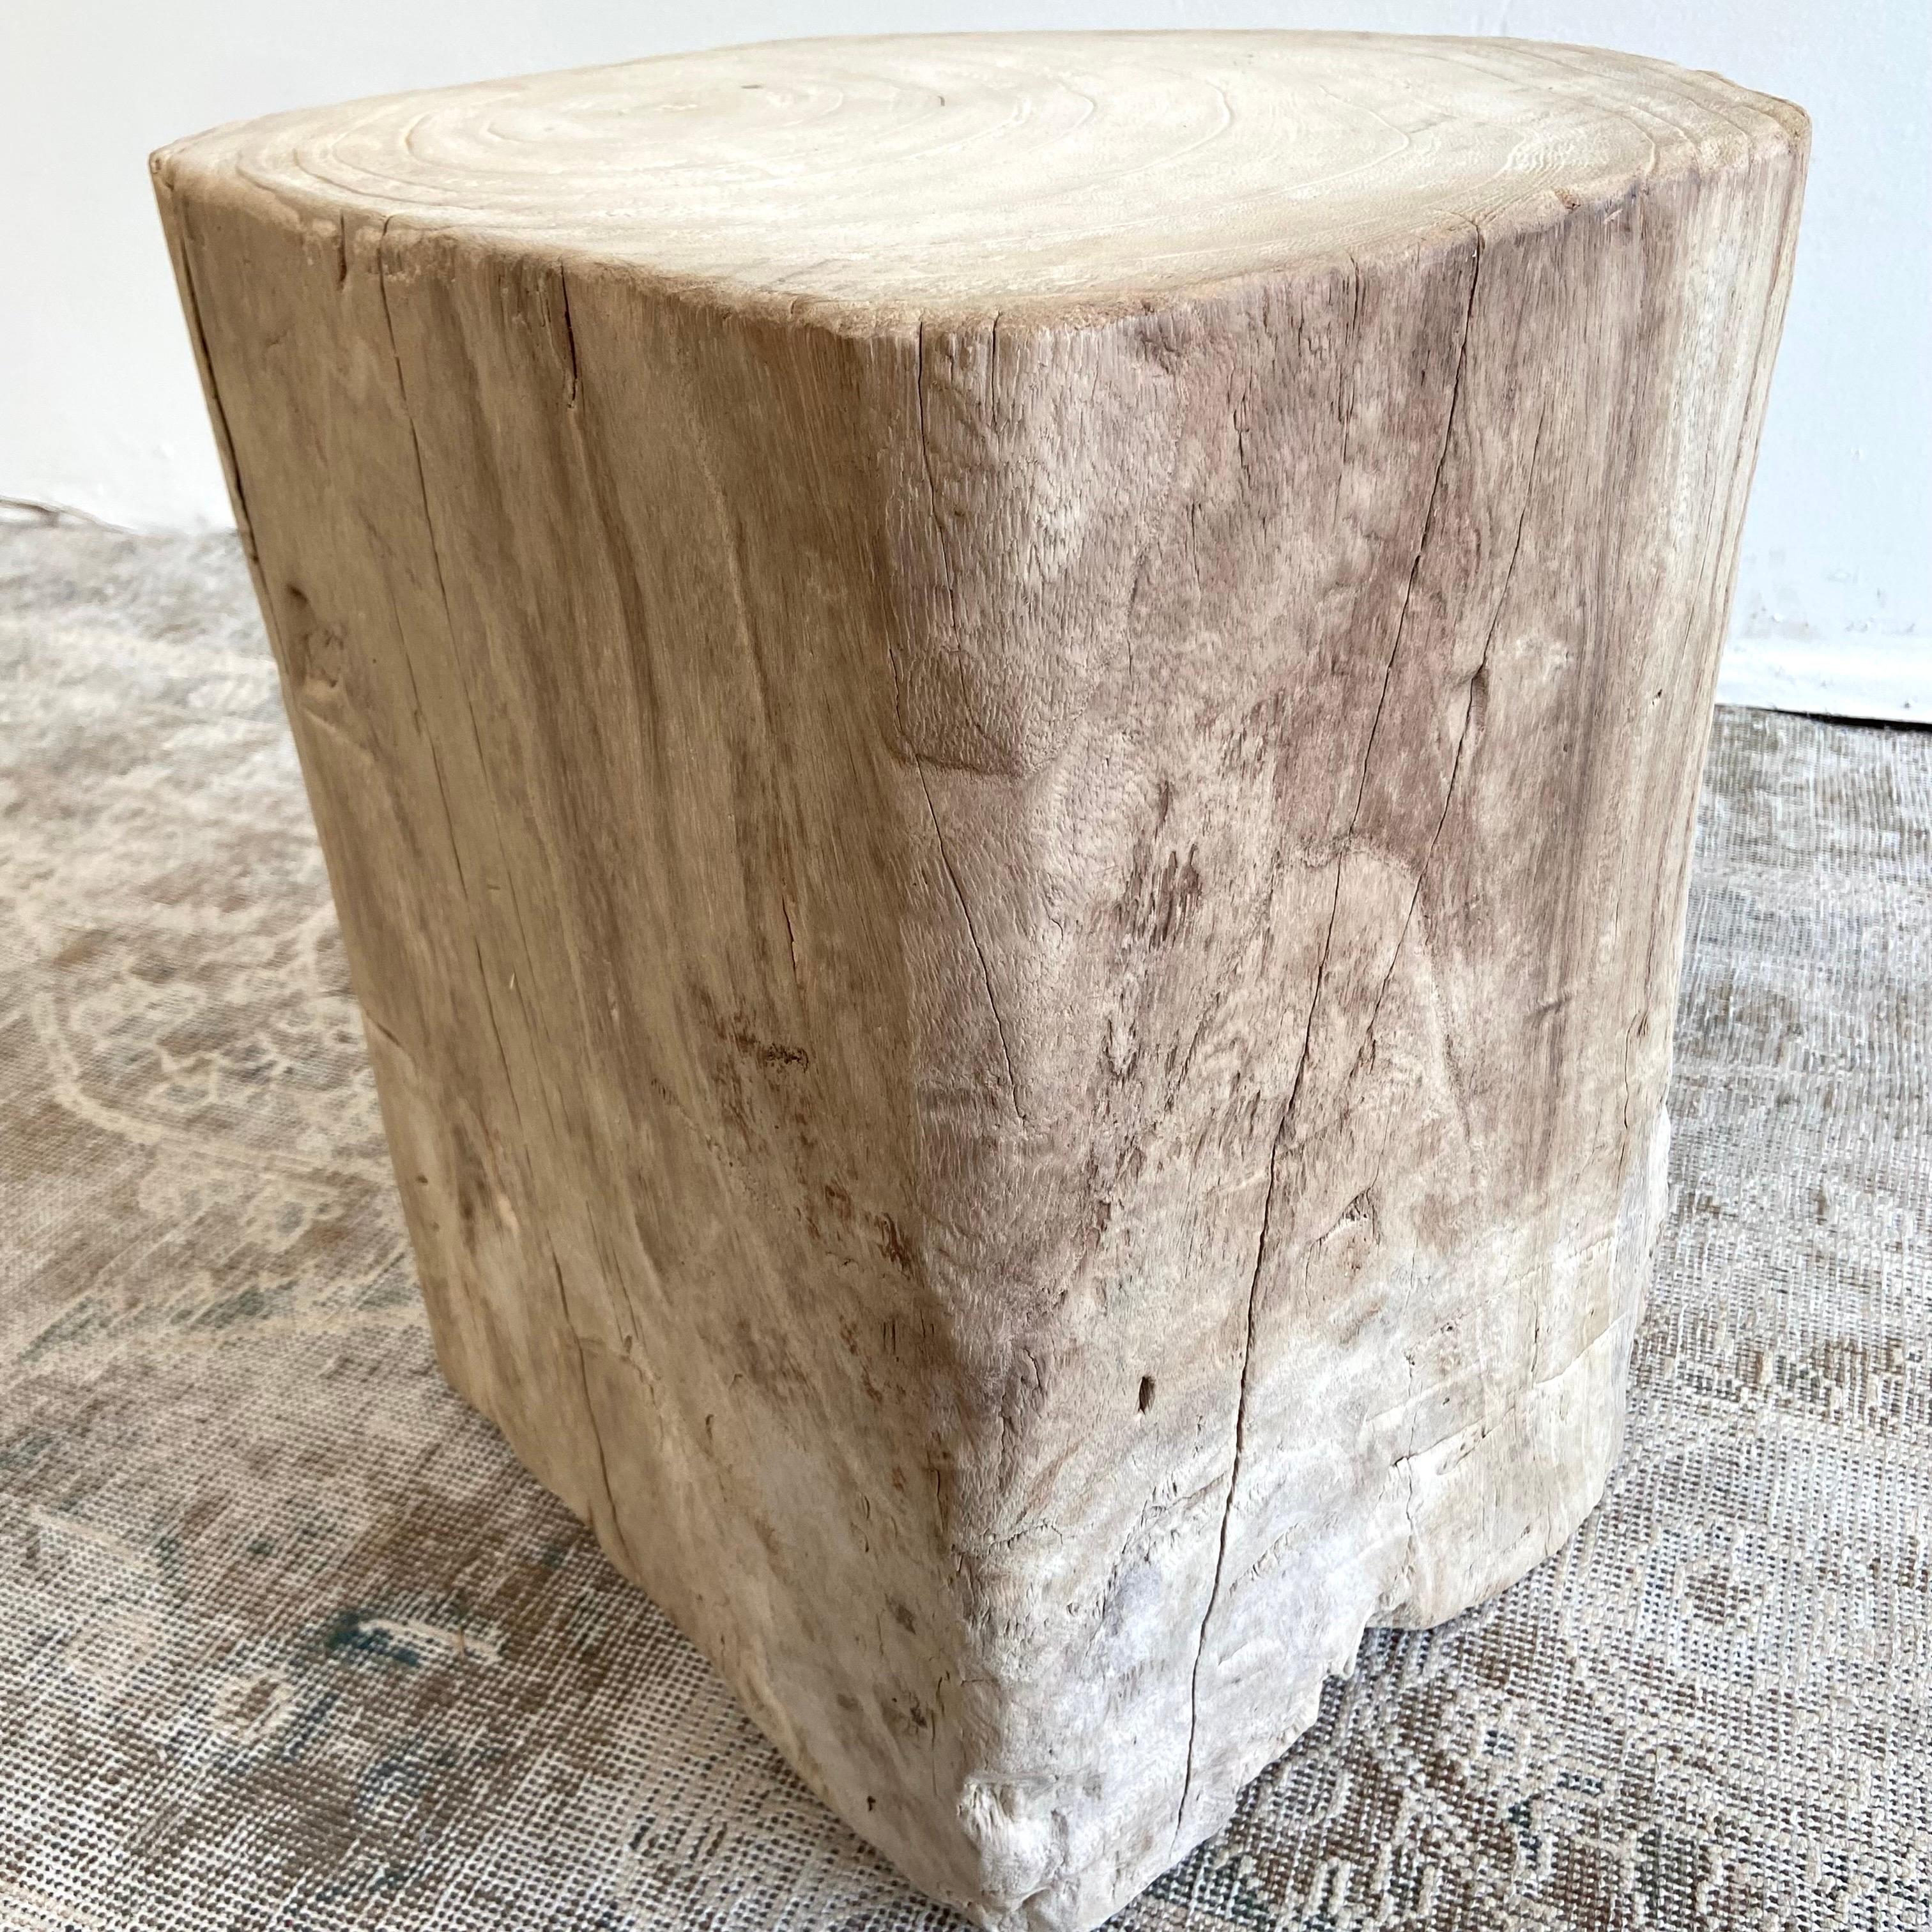 Natural Wood Stump Side Table or Stool 6